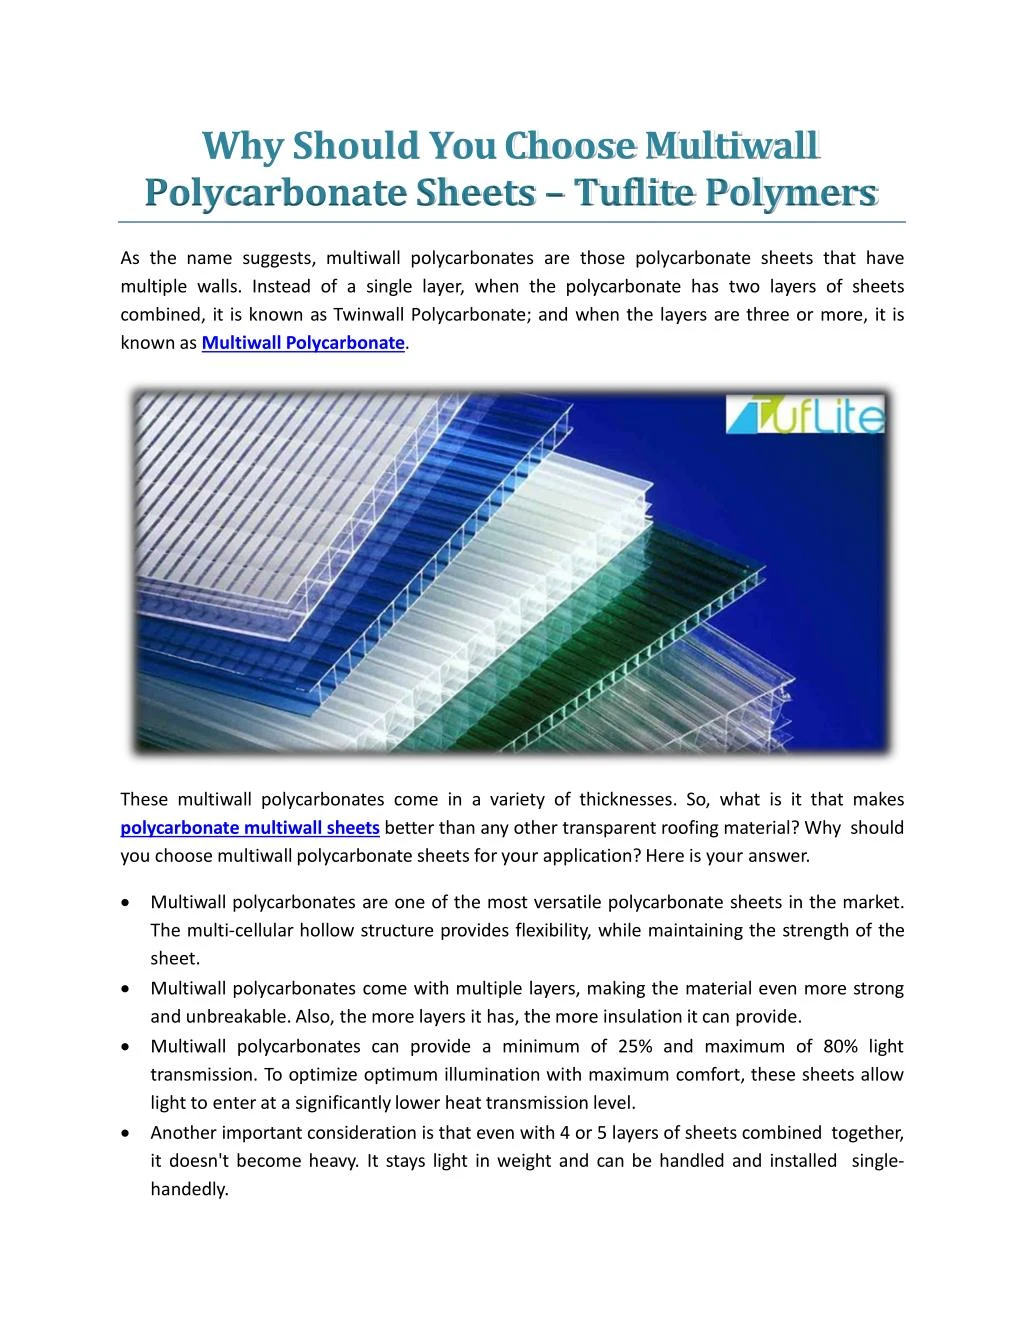 why should you choose multiwall polycarbonate sheets tuflite polymers